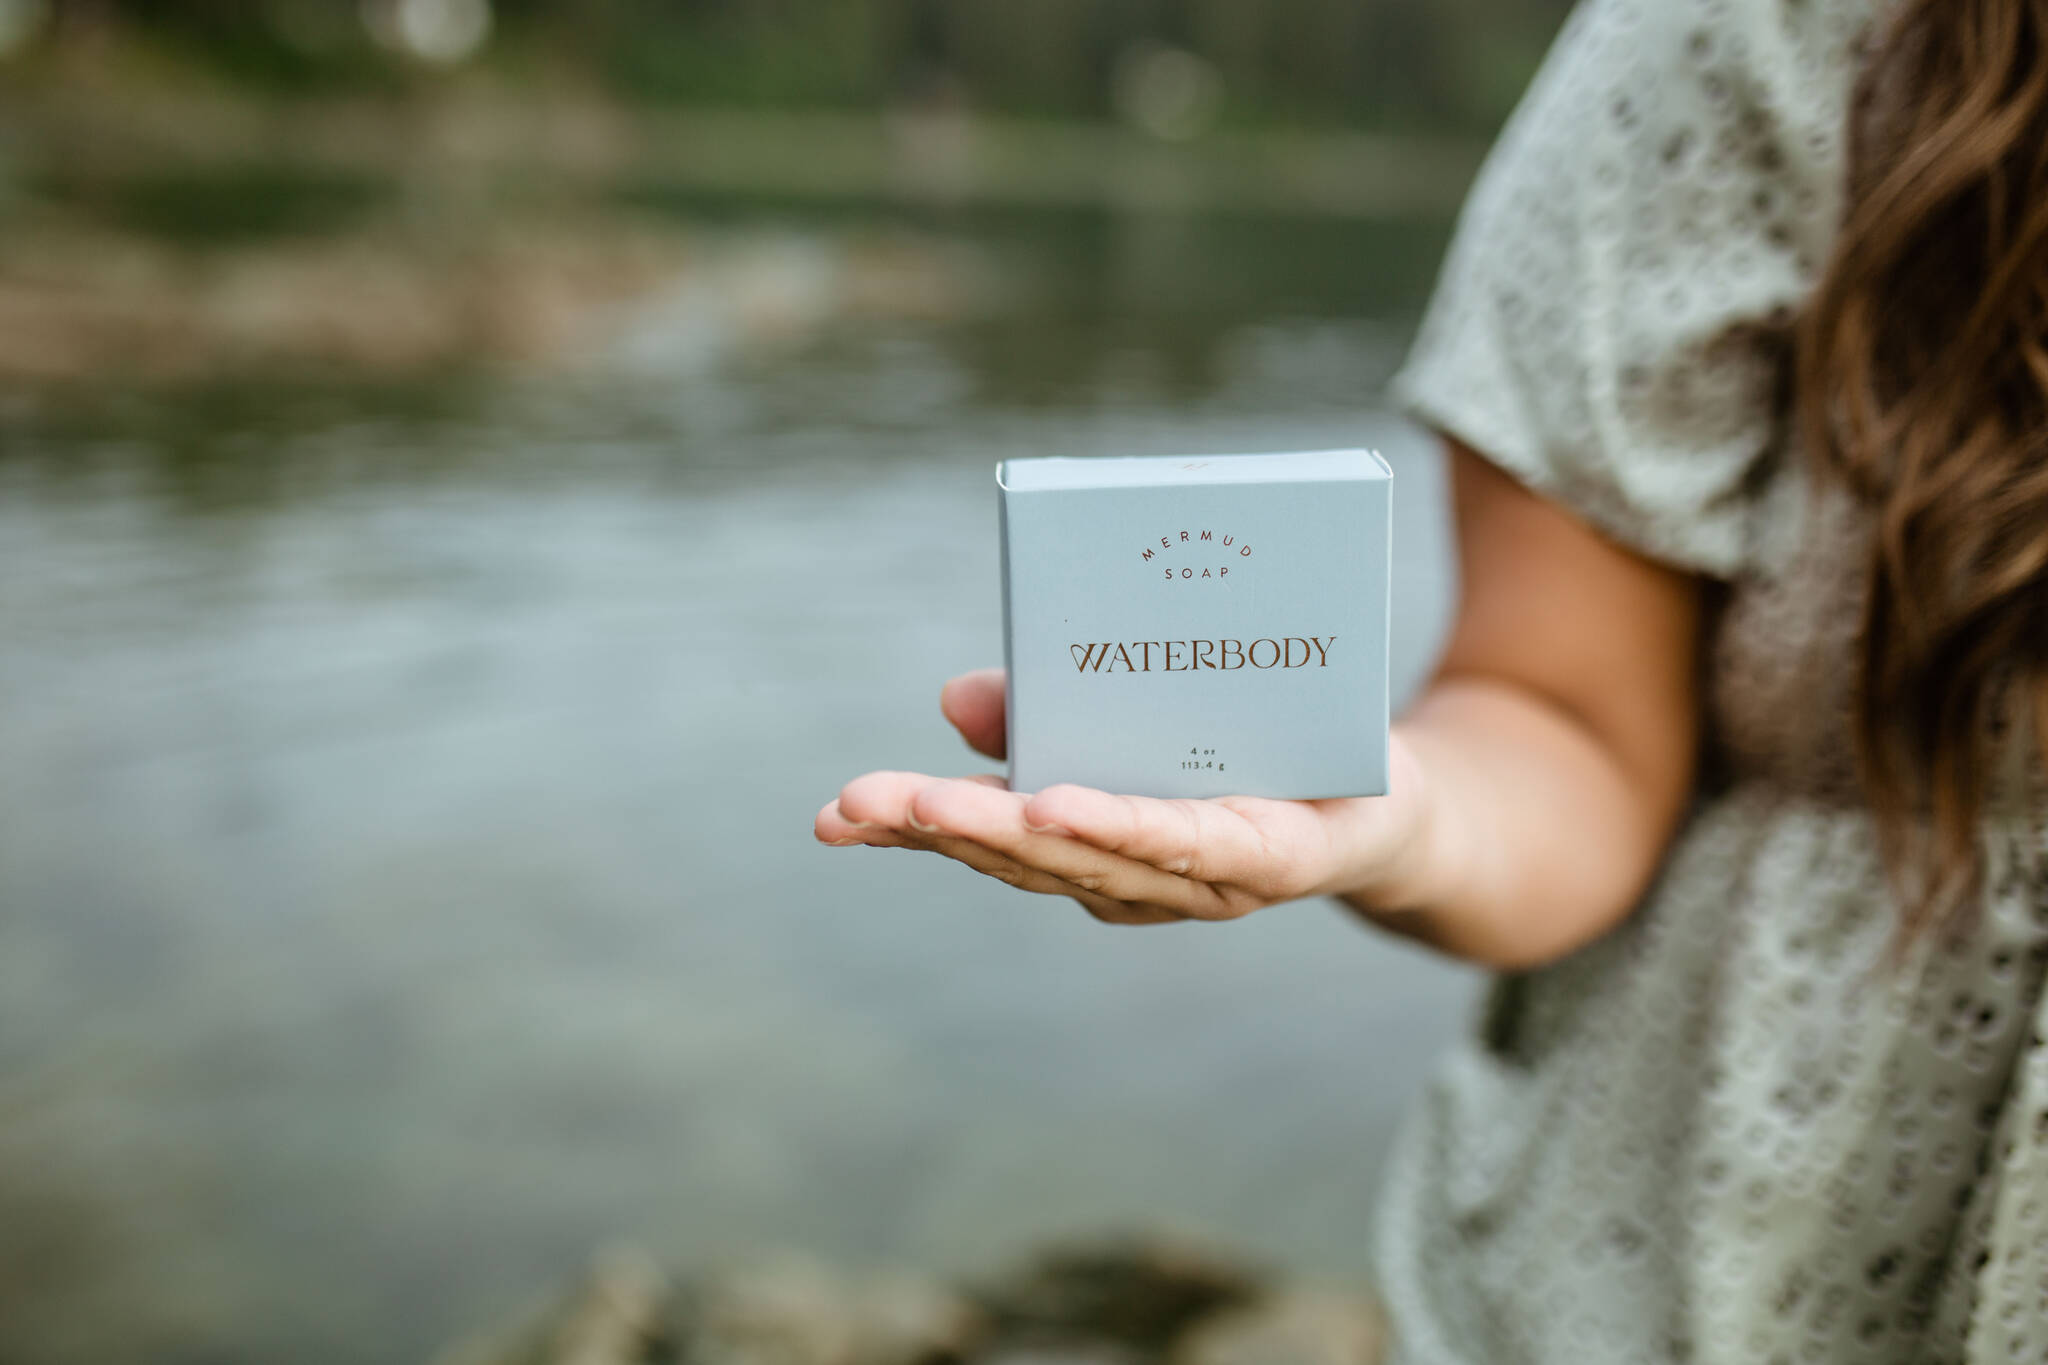 Best-selling Waterbody product Mermud soap, made with local ingredients from Wrangell. (Courtesy Photo / Sydney Akagi)
Best-selling Waterbody product Mermud soap, made with local ingredients from Wrangell. (Courtesy Photo / Sydney Akagi)